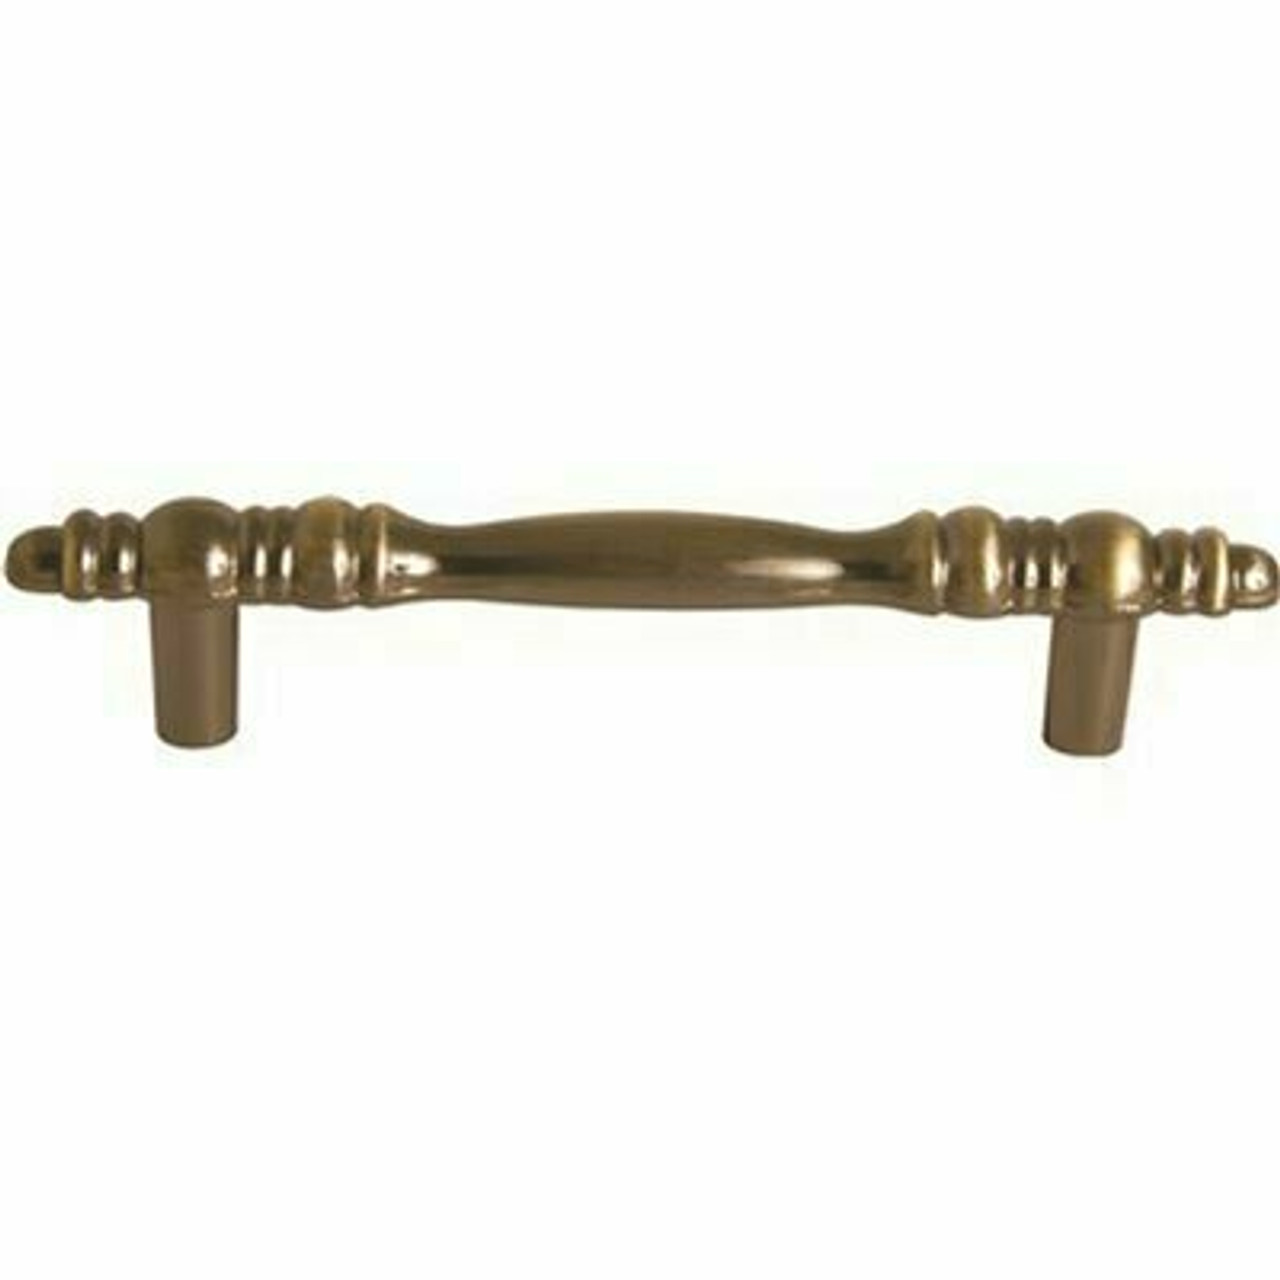 Anvil Mark 3 In. Antique Brass Cabinet Drawer Pull (5-Pack)